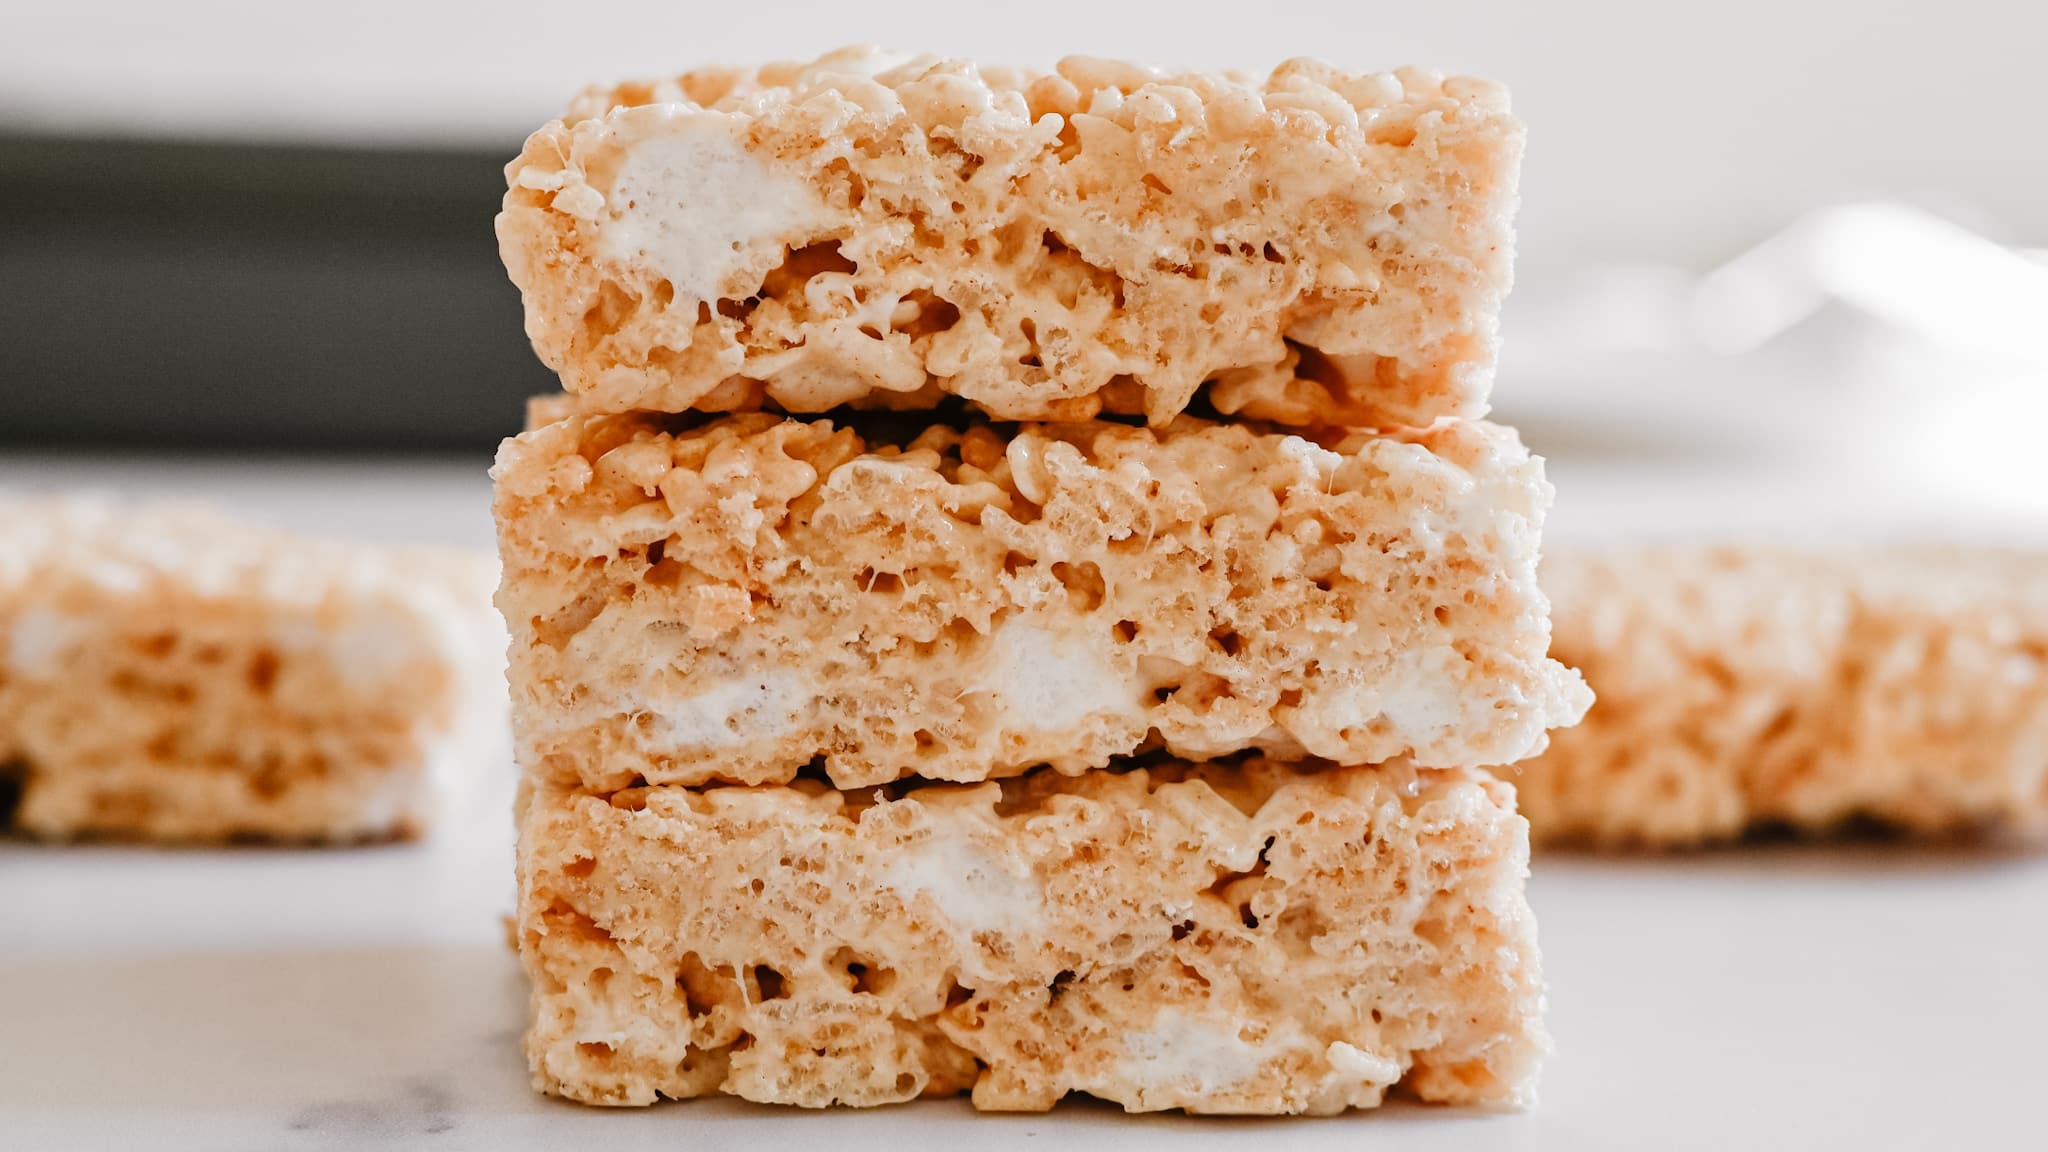 An image of three stacked rice krispies treats from the side view showing the marshmallows in the center.